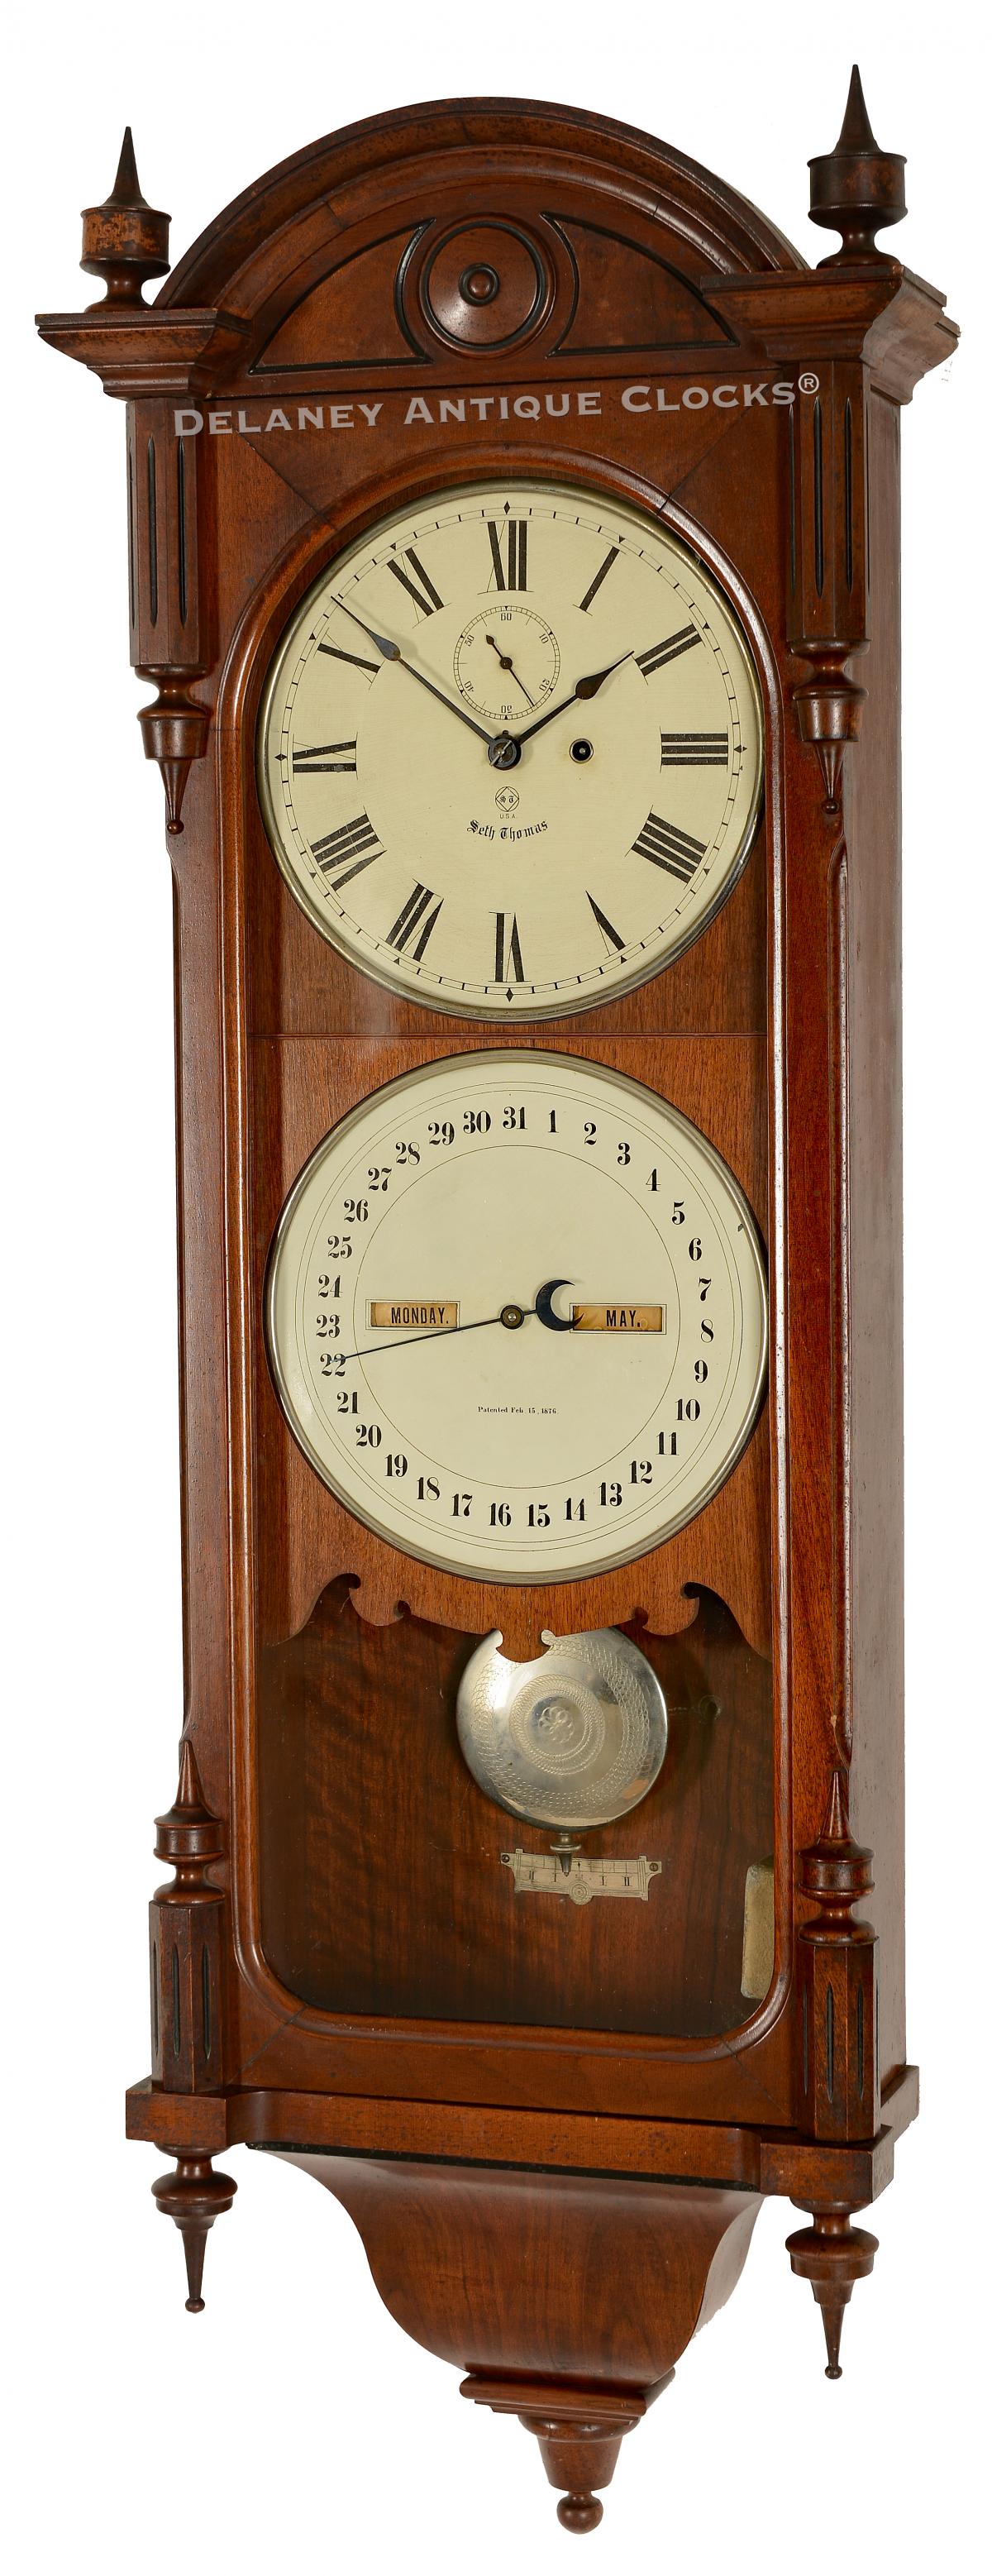  Seth Thomas double dial wall clock model number 10. 223046. Delaney Antique Clocks.